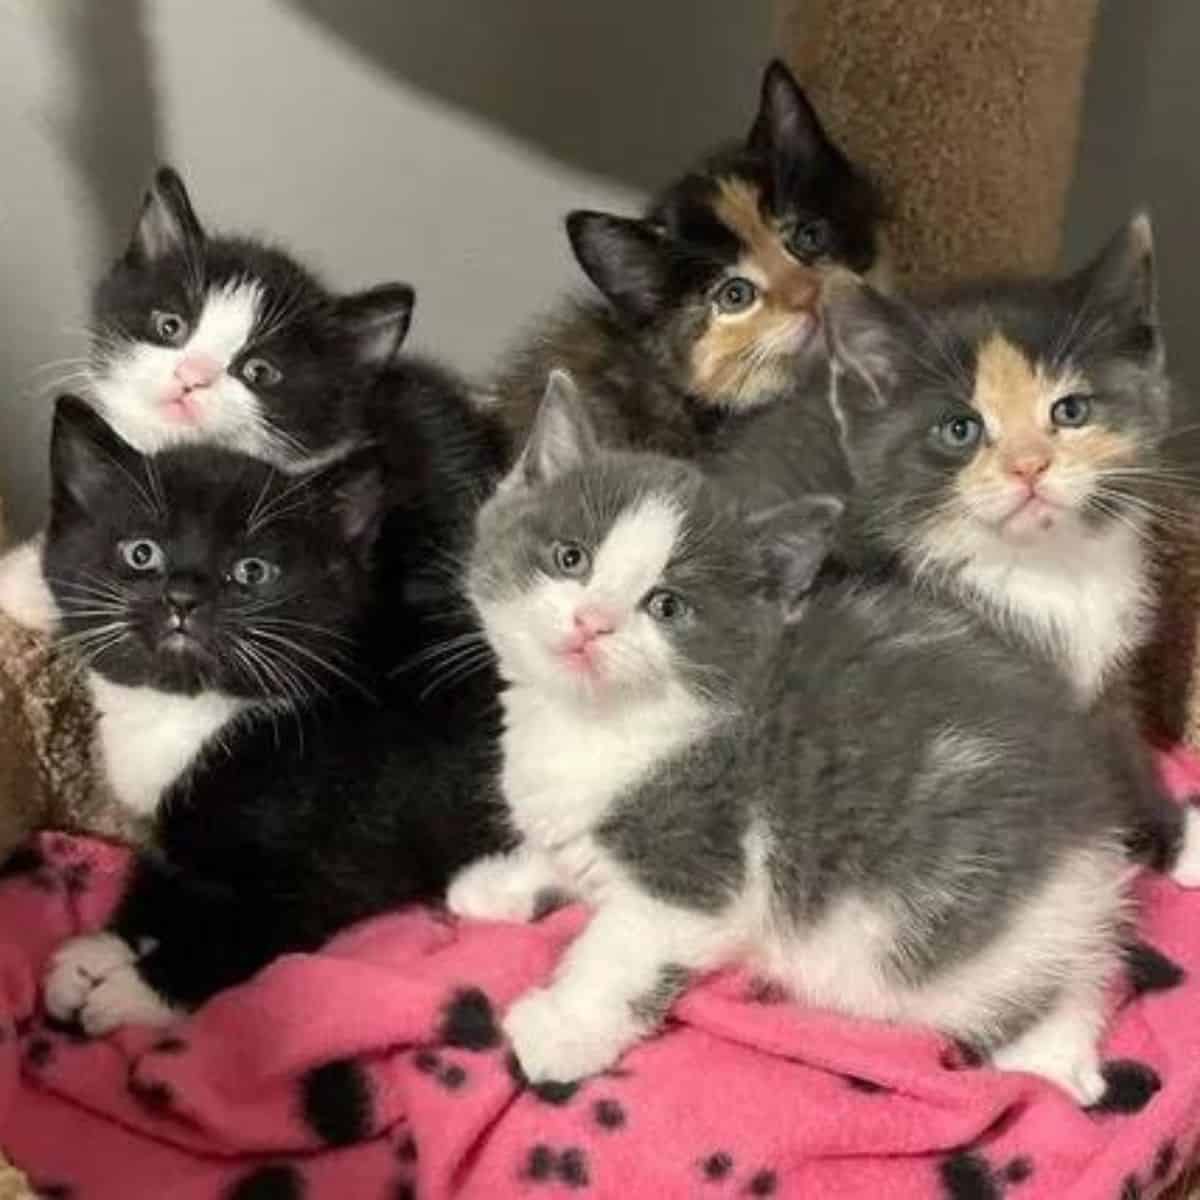 stray kittens on a pink blanket